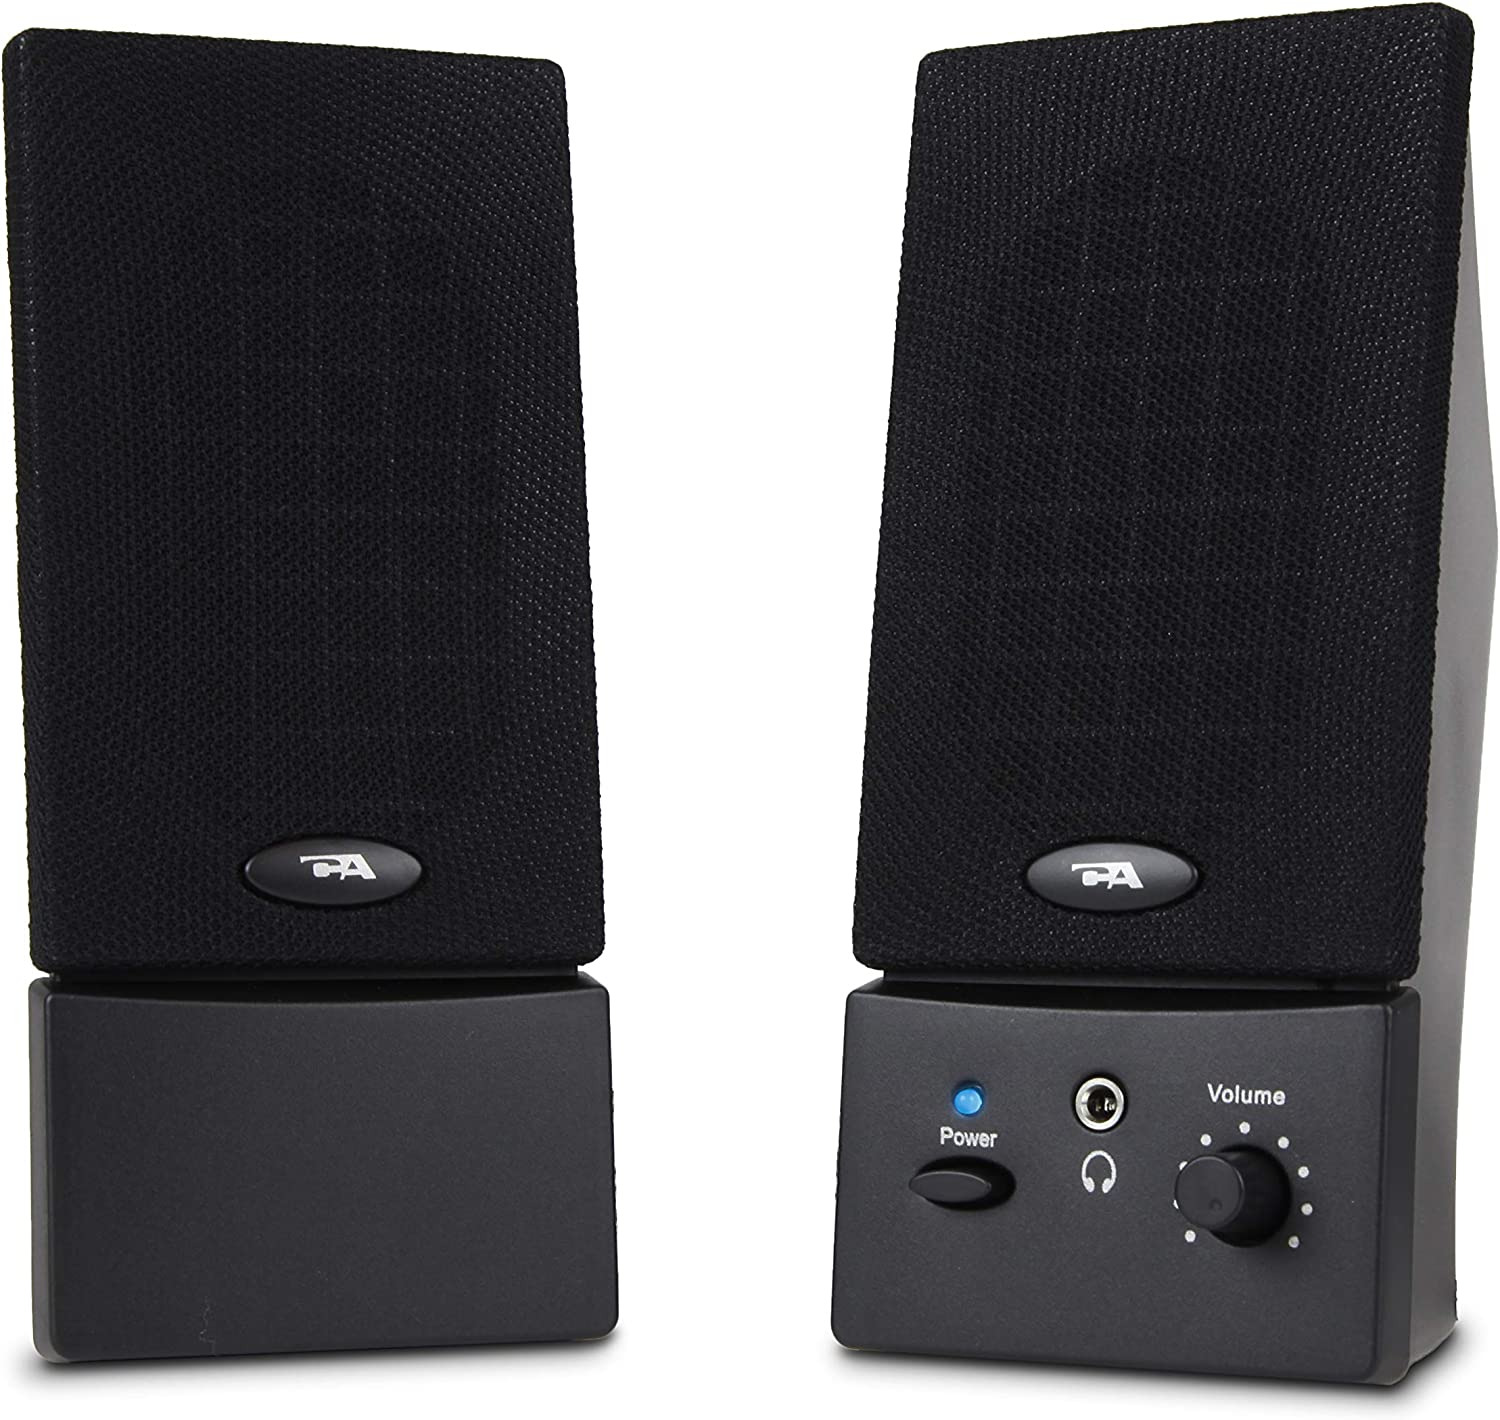 Cyber Acoustics USB Powered 2.0 Desktop Speaker System with 3.5mm Audio for PC